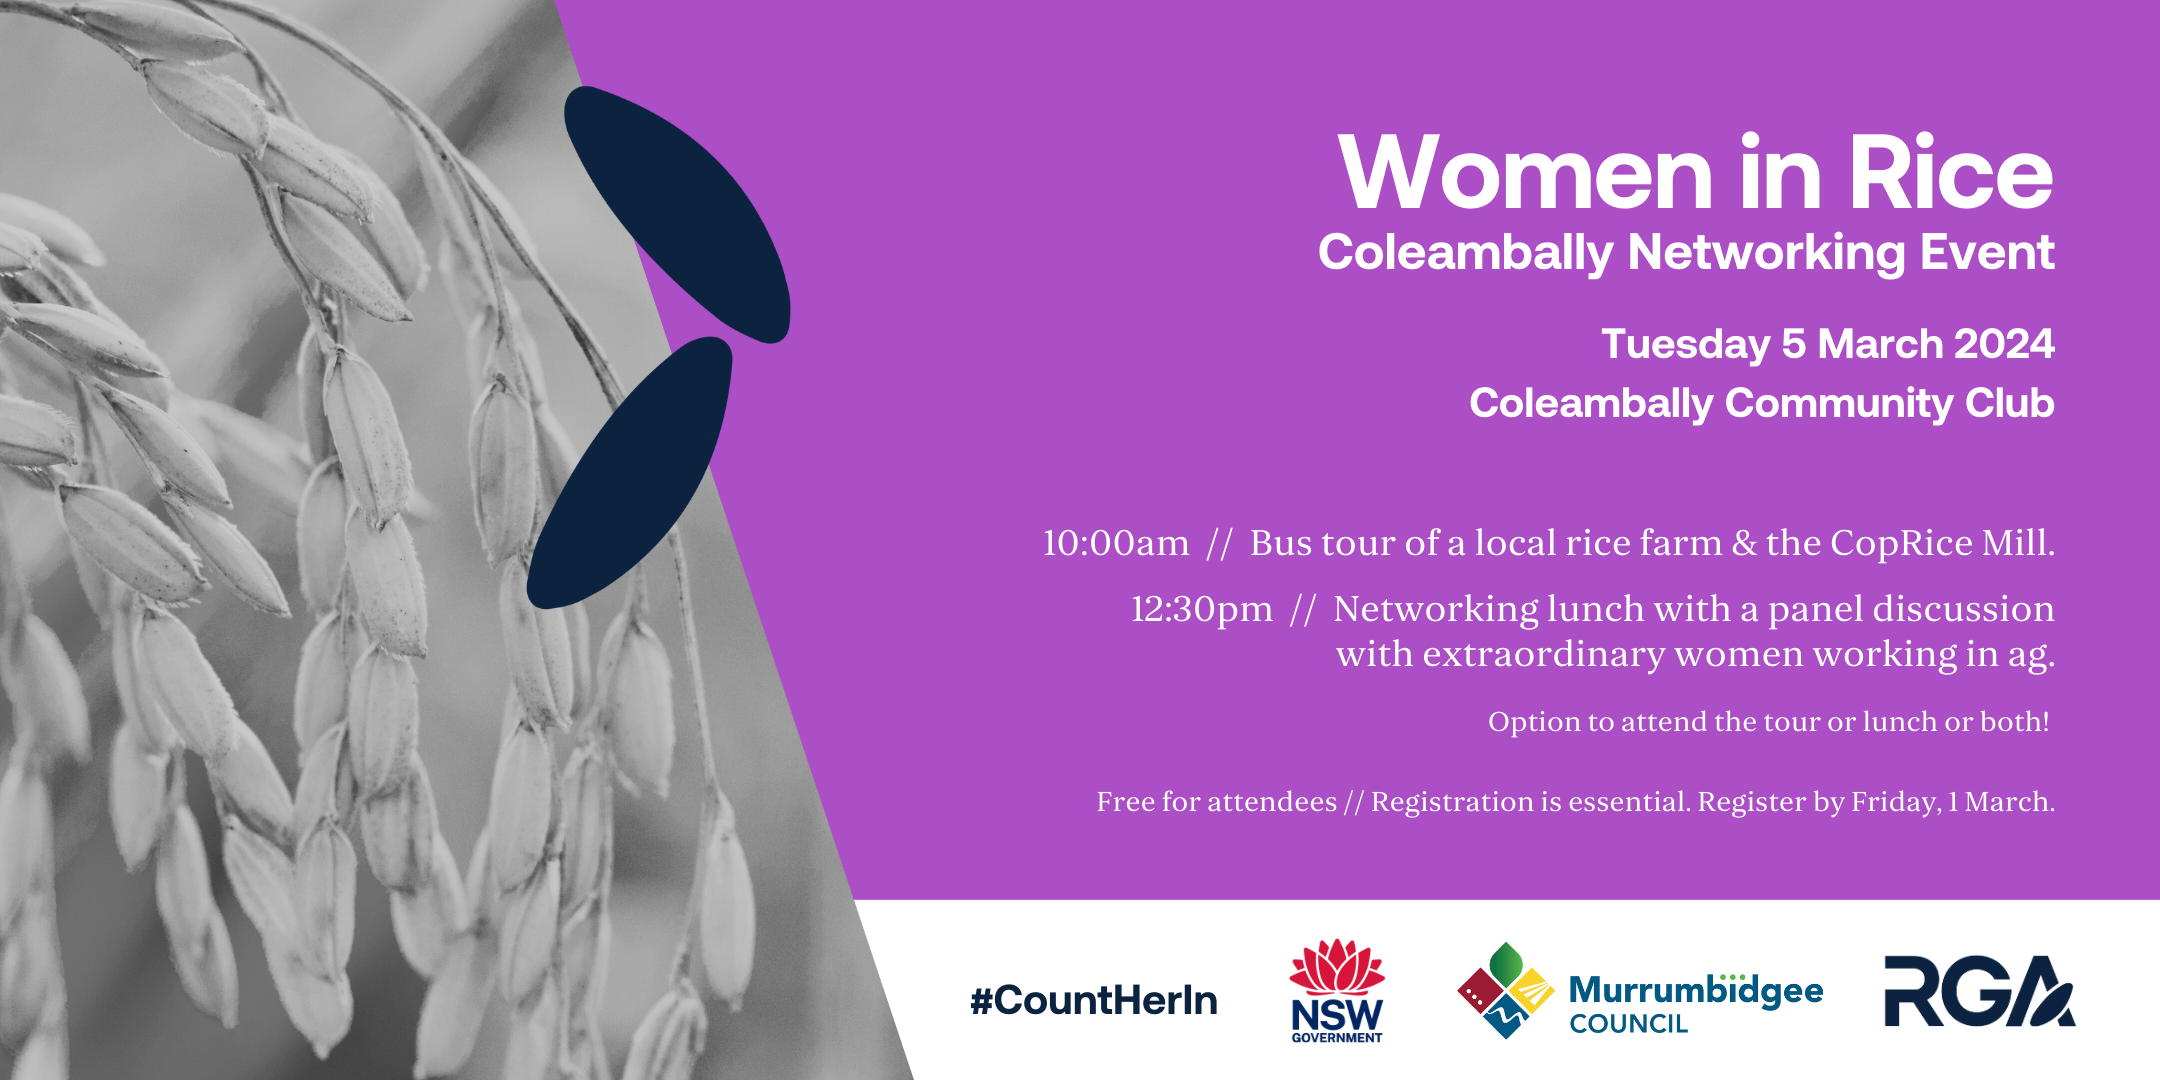 Women in Rice Coleambally Networking Event